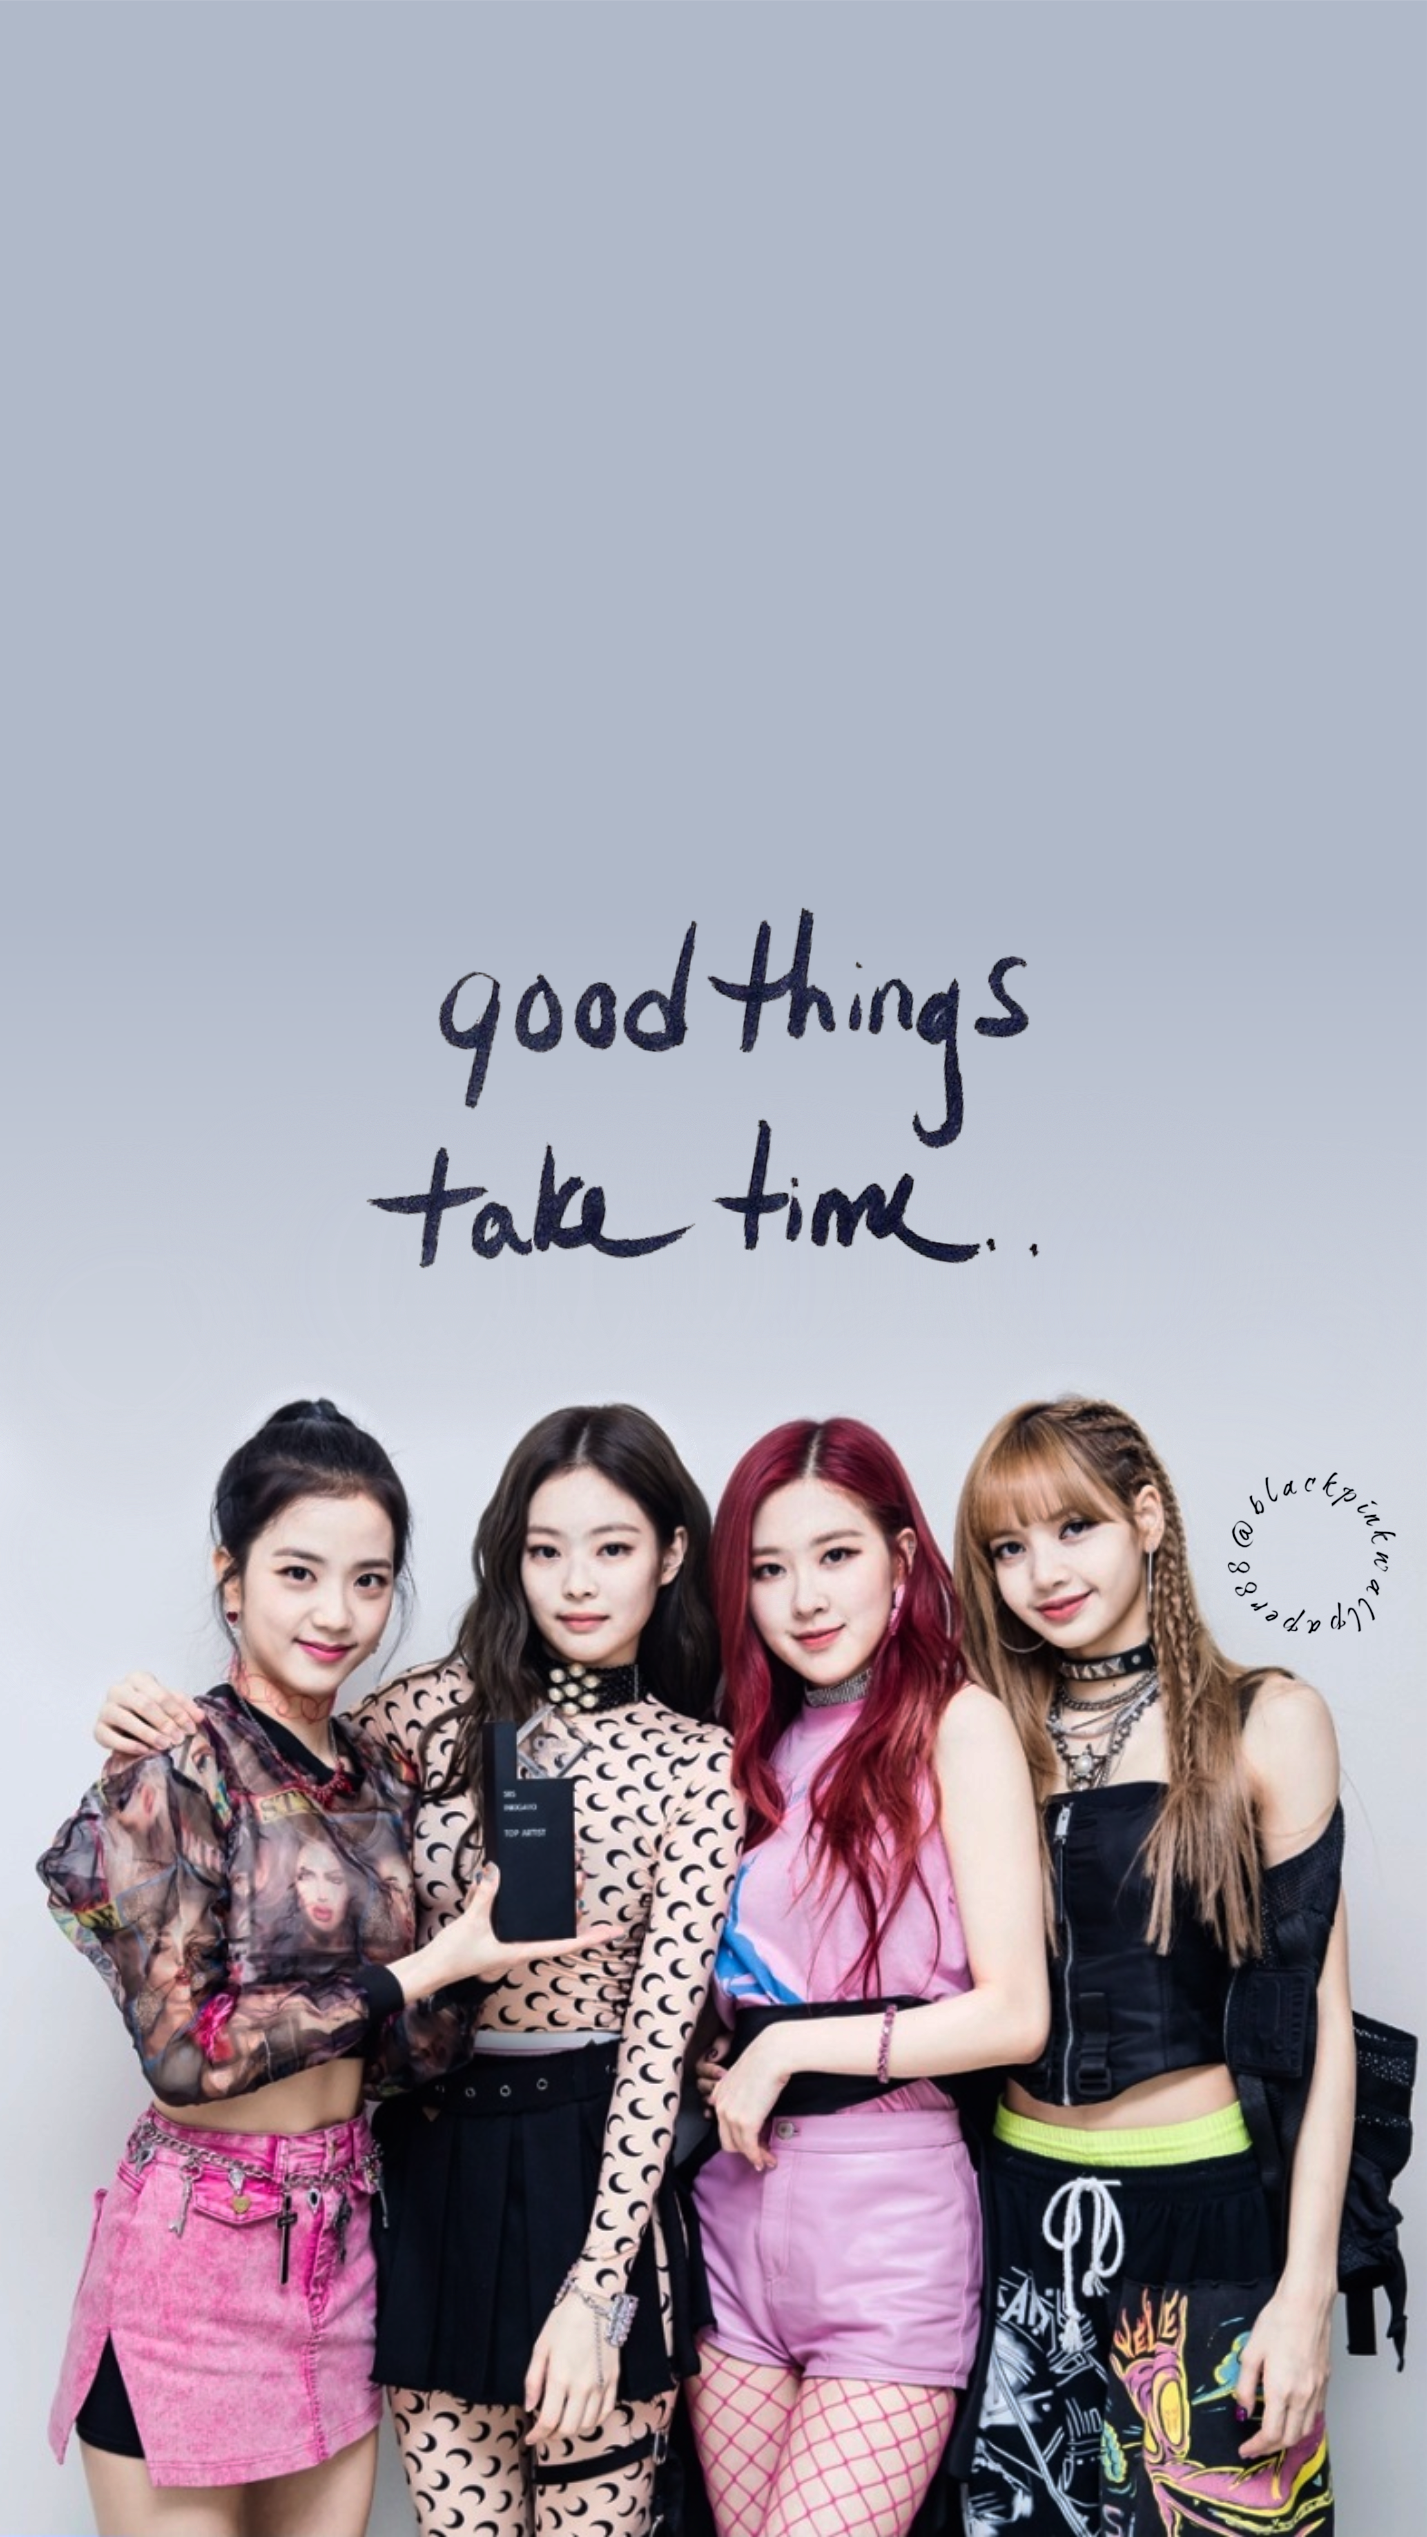 Blackpink And BTS iPhone Wallpapers - Wallpaper Cave